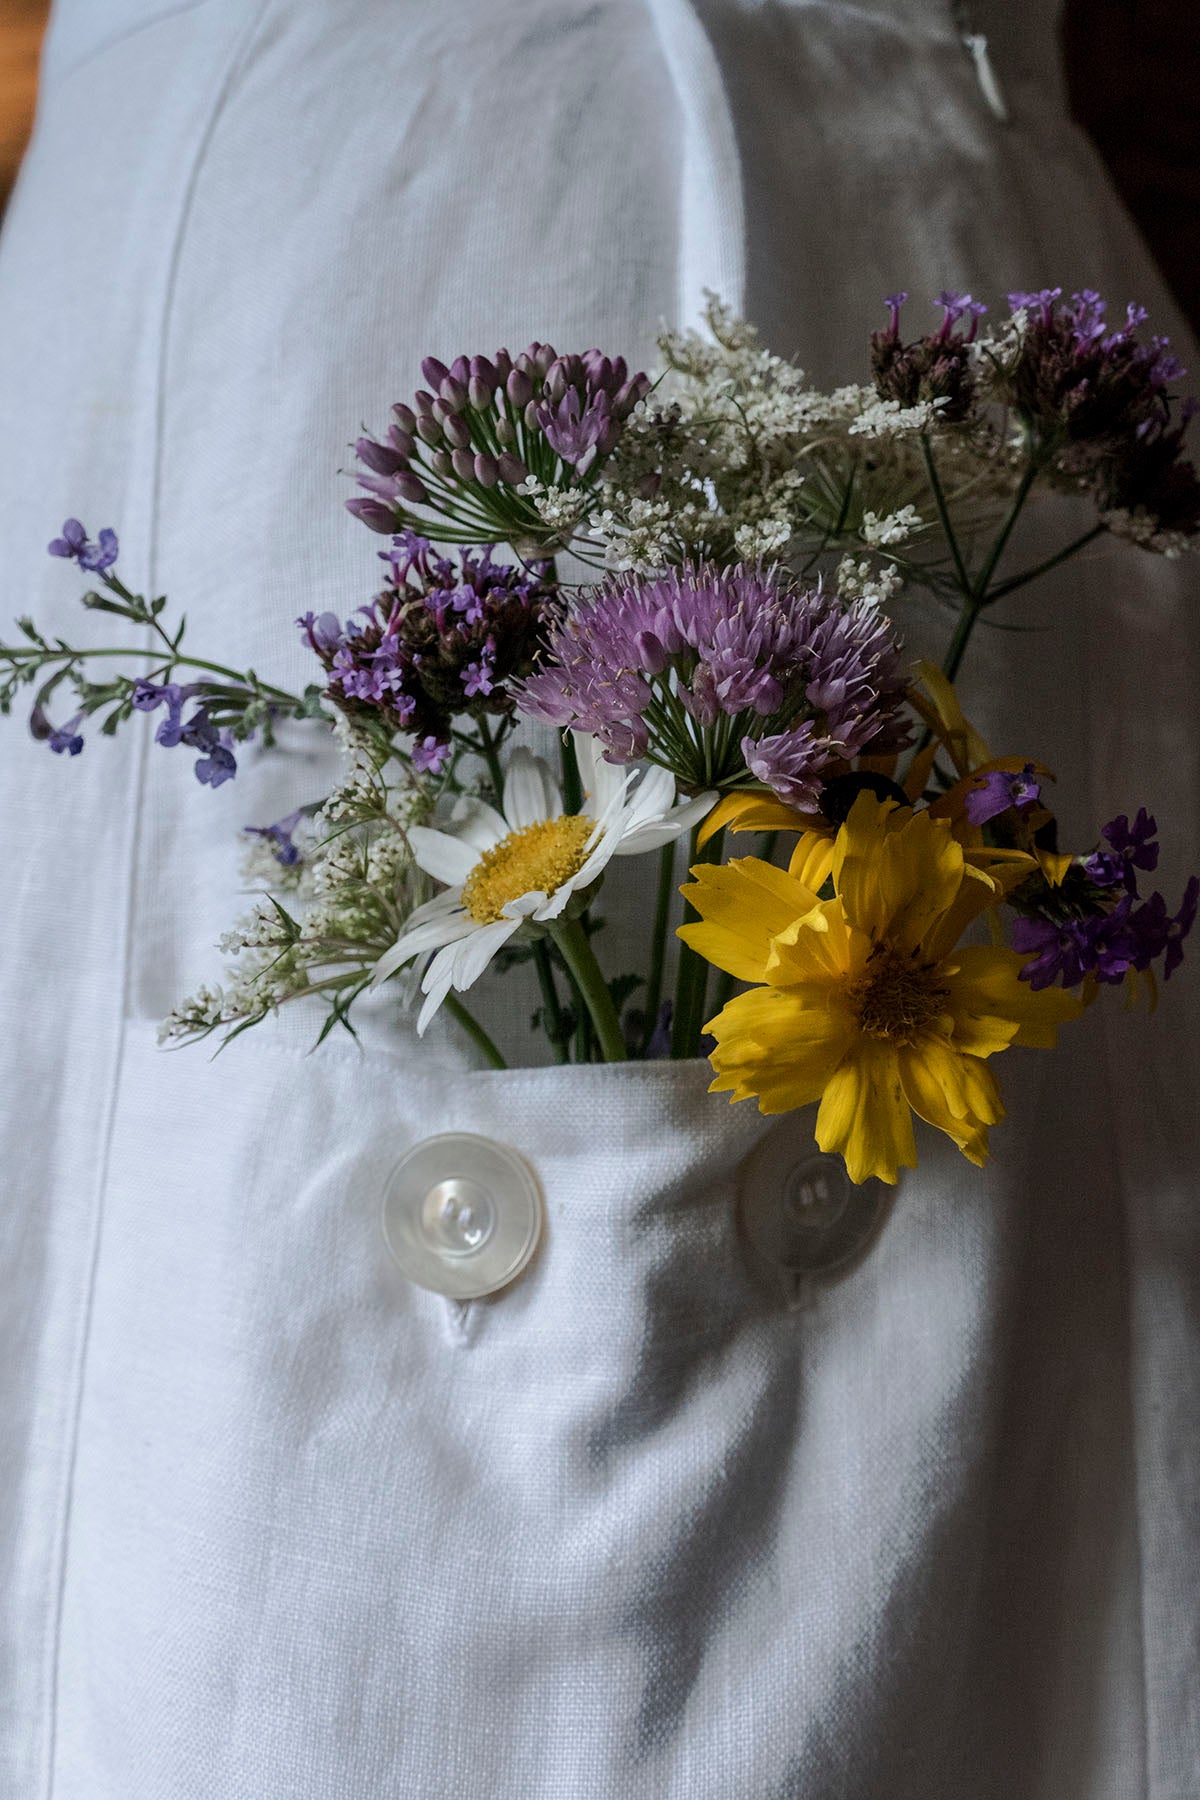 white pocket with flowers sitting in it